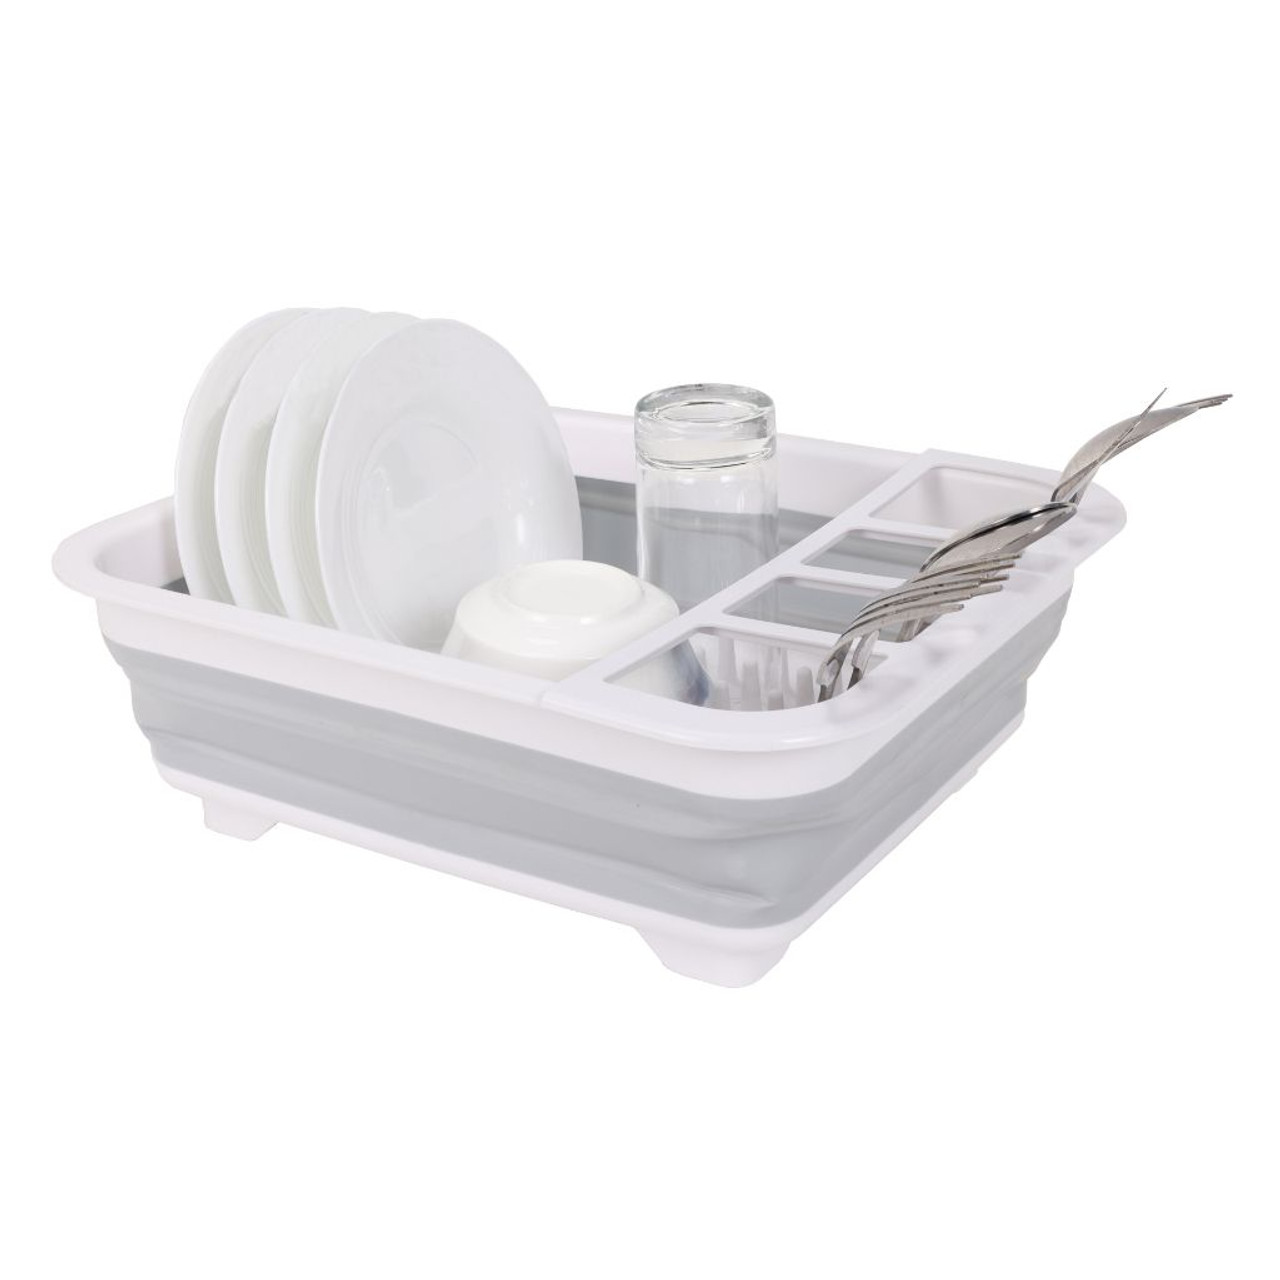 Collapsible Dish Drying Rack product image